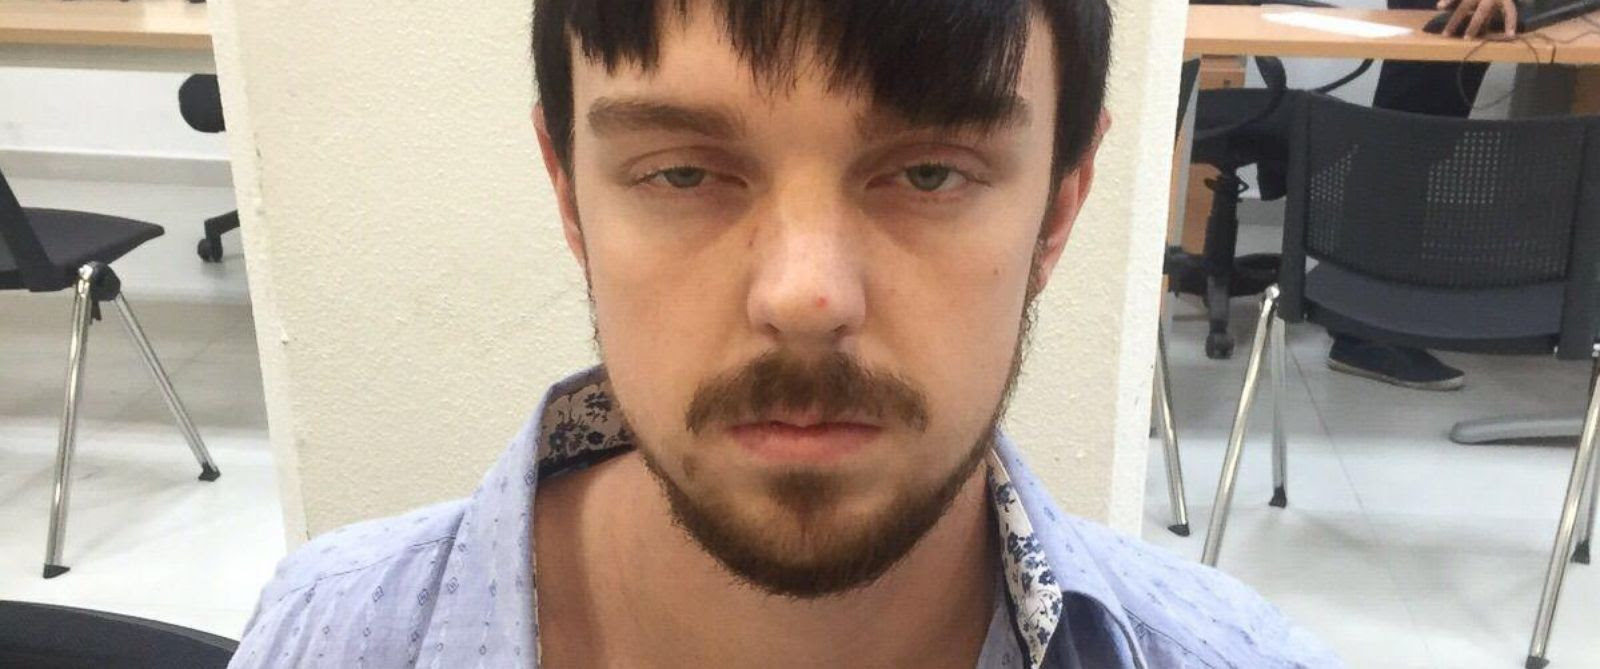 PHOTO: This photograph released by the Jalisco State Prosecutors Office shows Ethan Couch, who was detained in Mexico on Dec. 28, 2015. He was convicted in 2013 of four counts of intoxication manslaughter after a drunk driving accident but avoided jail.